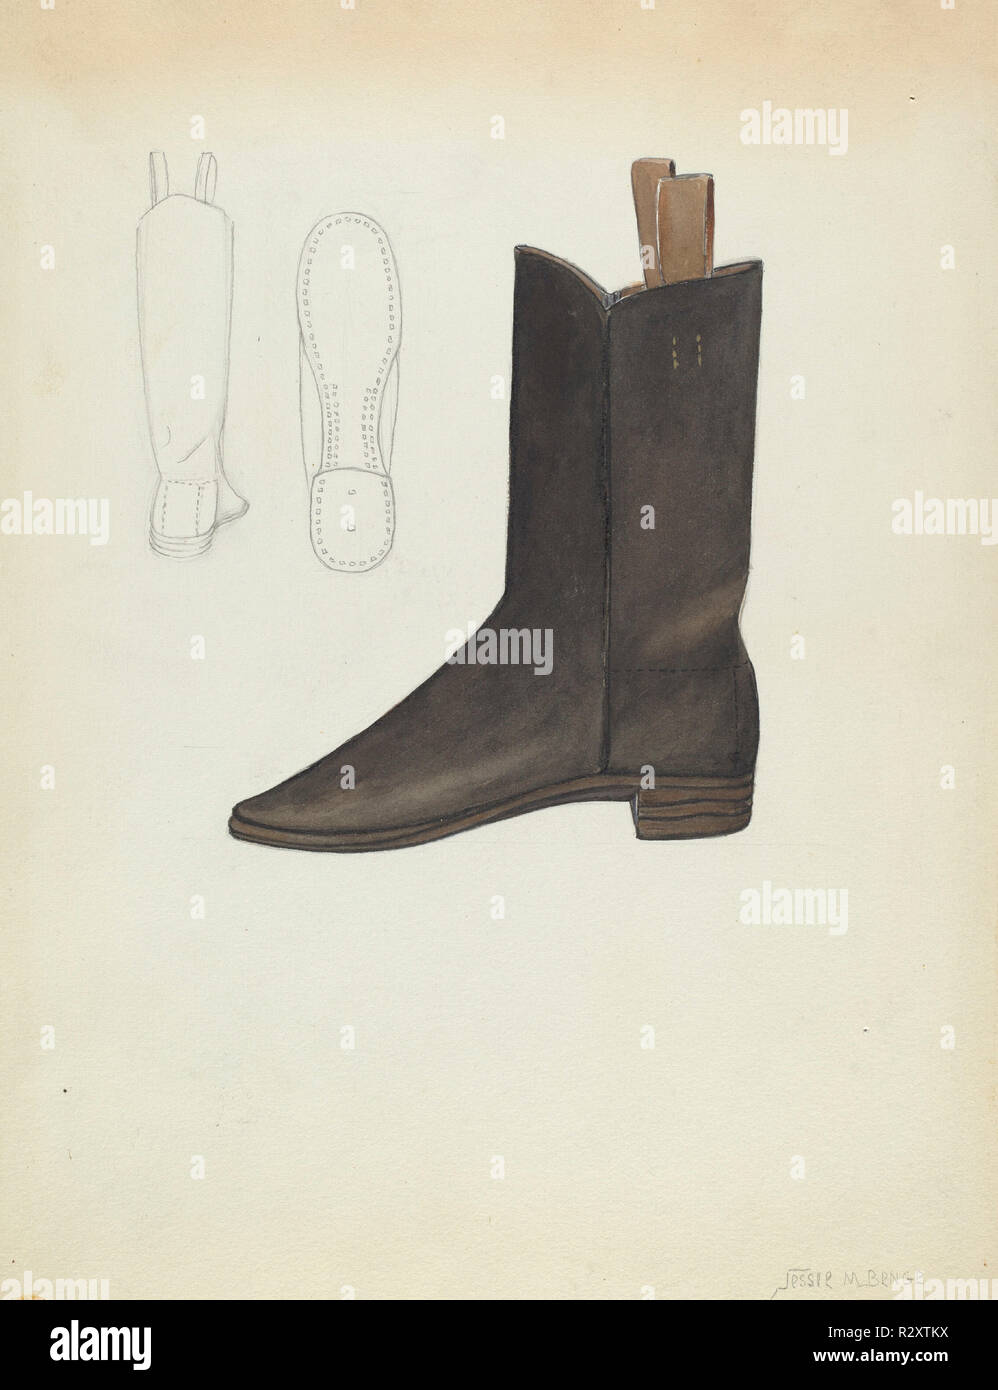 Boy's Boot. Dated: c. 1936. Dimensions: overall: 29.8 x 22.9 cm (11 3/4 x 9 in.). Medium: watercolor, graphite, and pen and ink on paper. Museum: National Gallery of Art, Washington DC. Author: Jessie M. Benge. Stock Photo